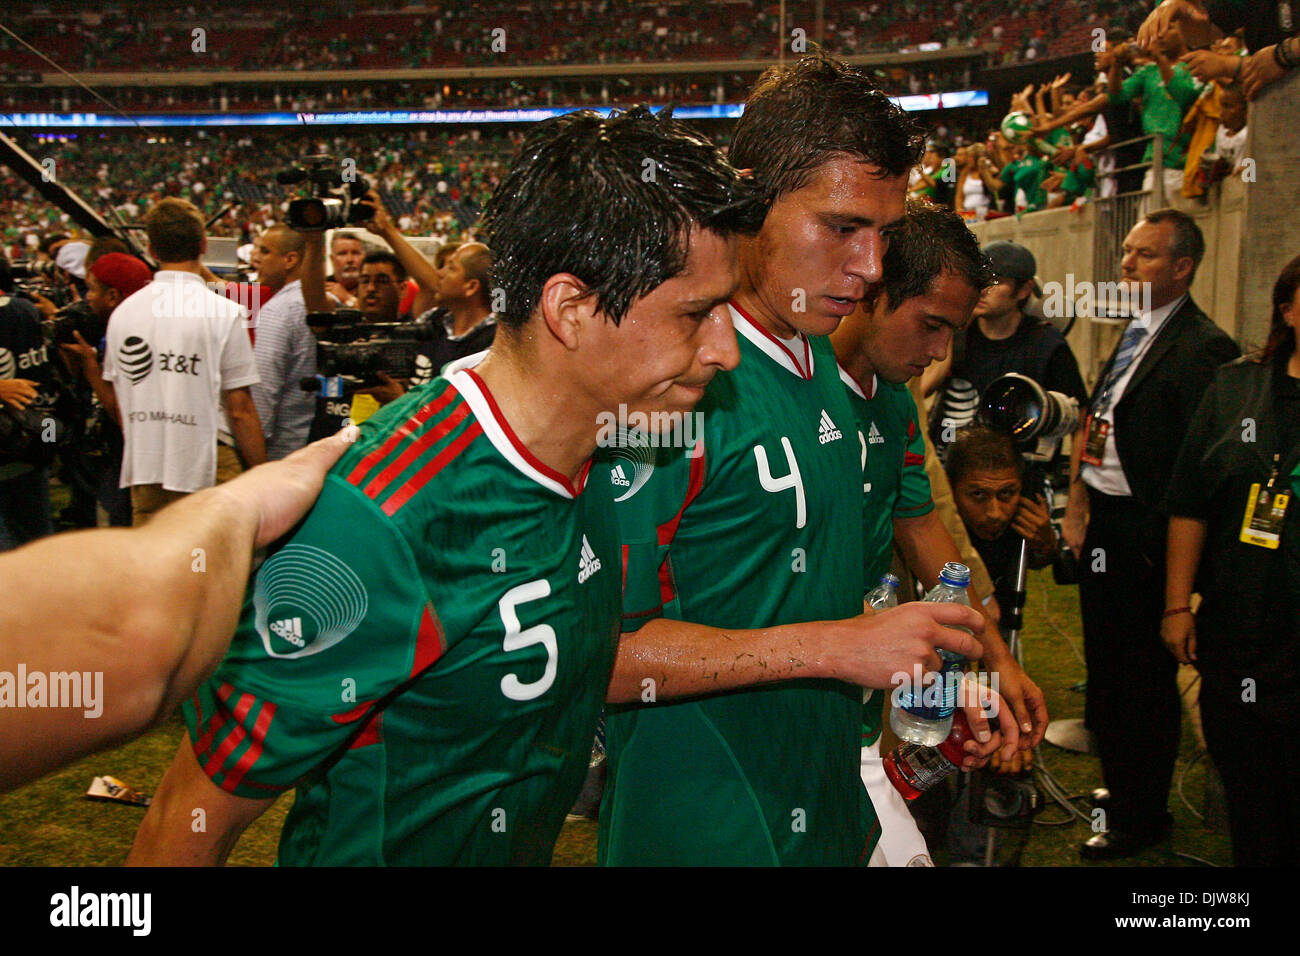 Ricardo Osorio (#5) Defender for Mexico, Hector Moreno (#4) Defender for Mexico, and Francesco Rodriguez (#2) Defender for Mexico exit the field following the match against Angola.  Mexico defeated Angola 1-0 at Reliant Stadium in Houston, TX. (Credit Image: © Anthony Vasser/Southcreek Global/ZUMApress.com) Stock Photo